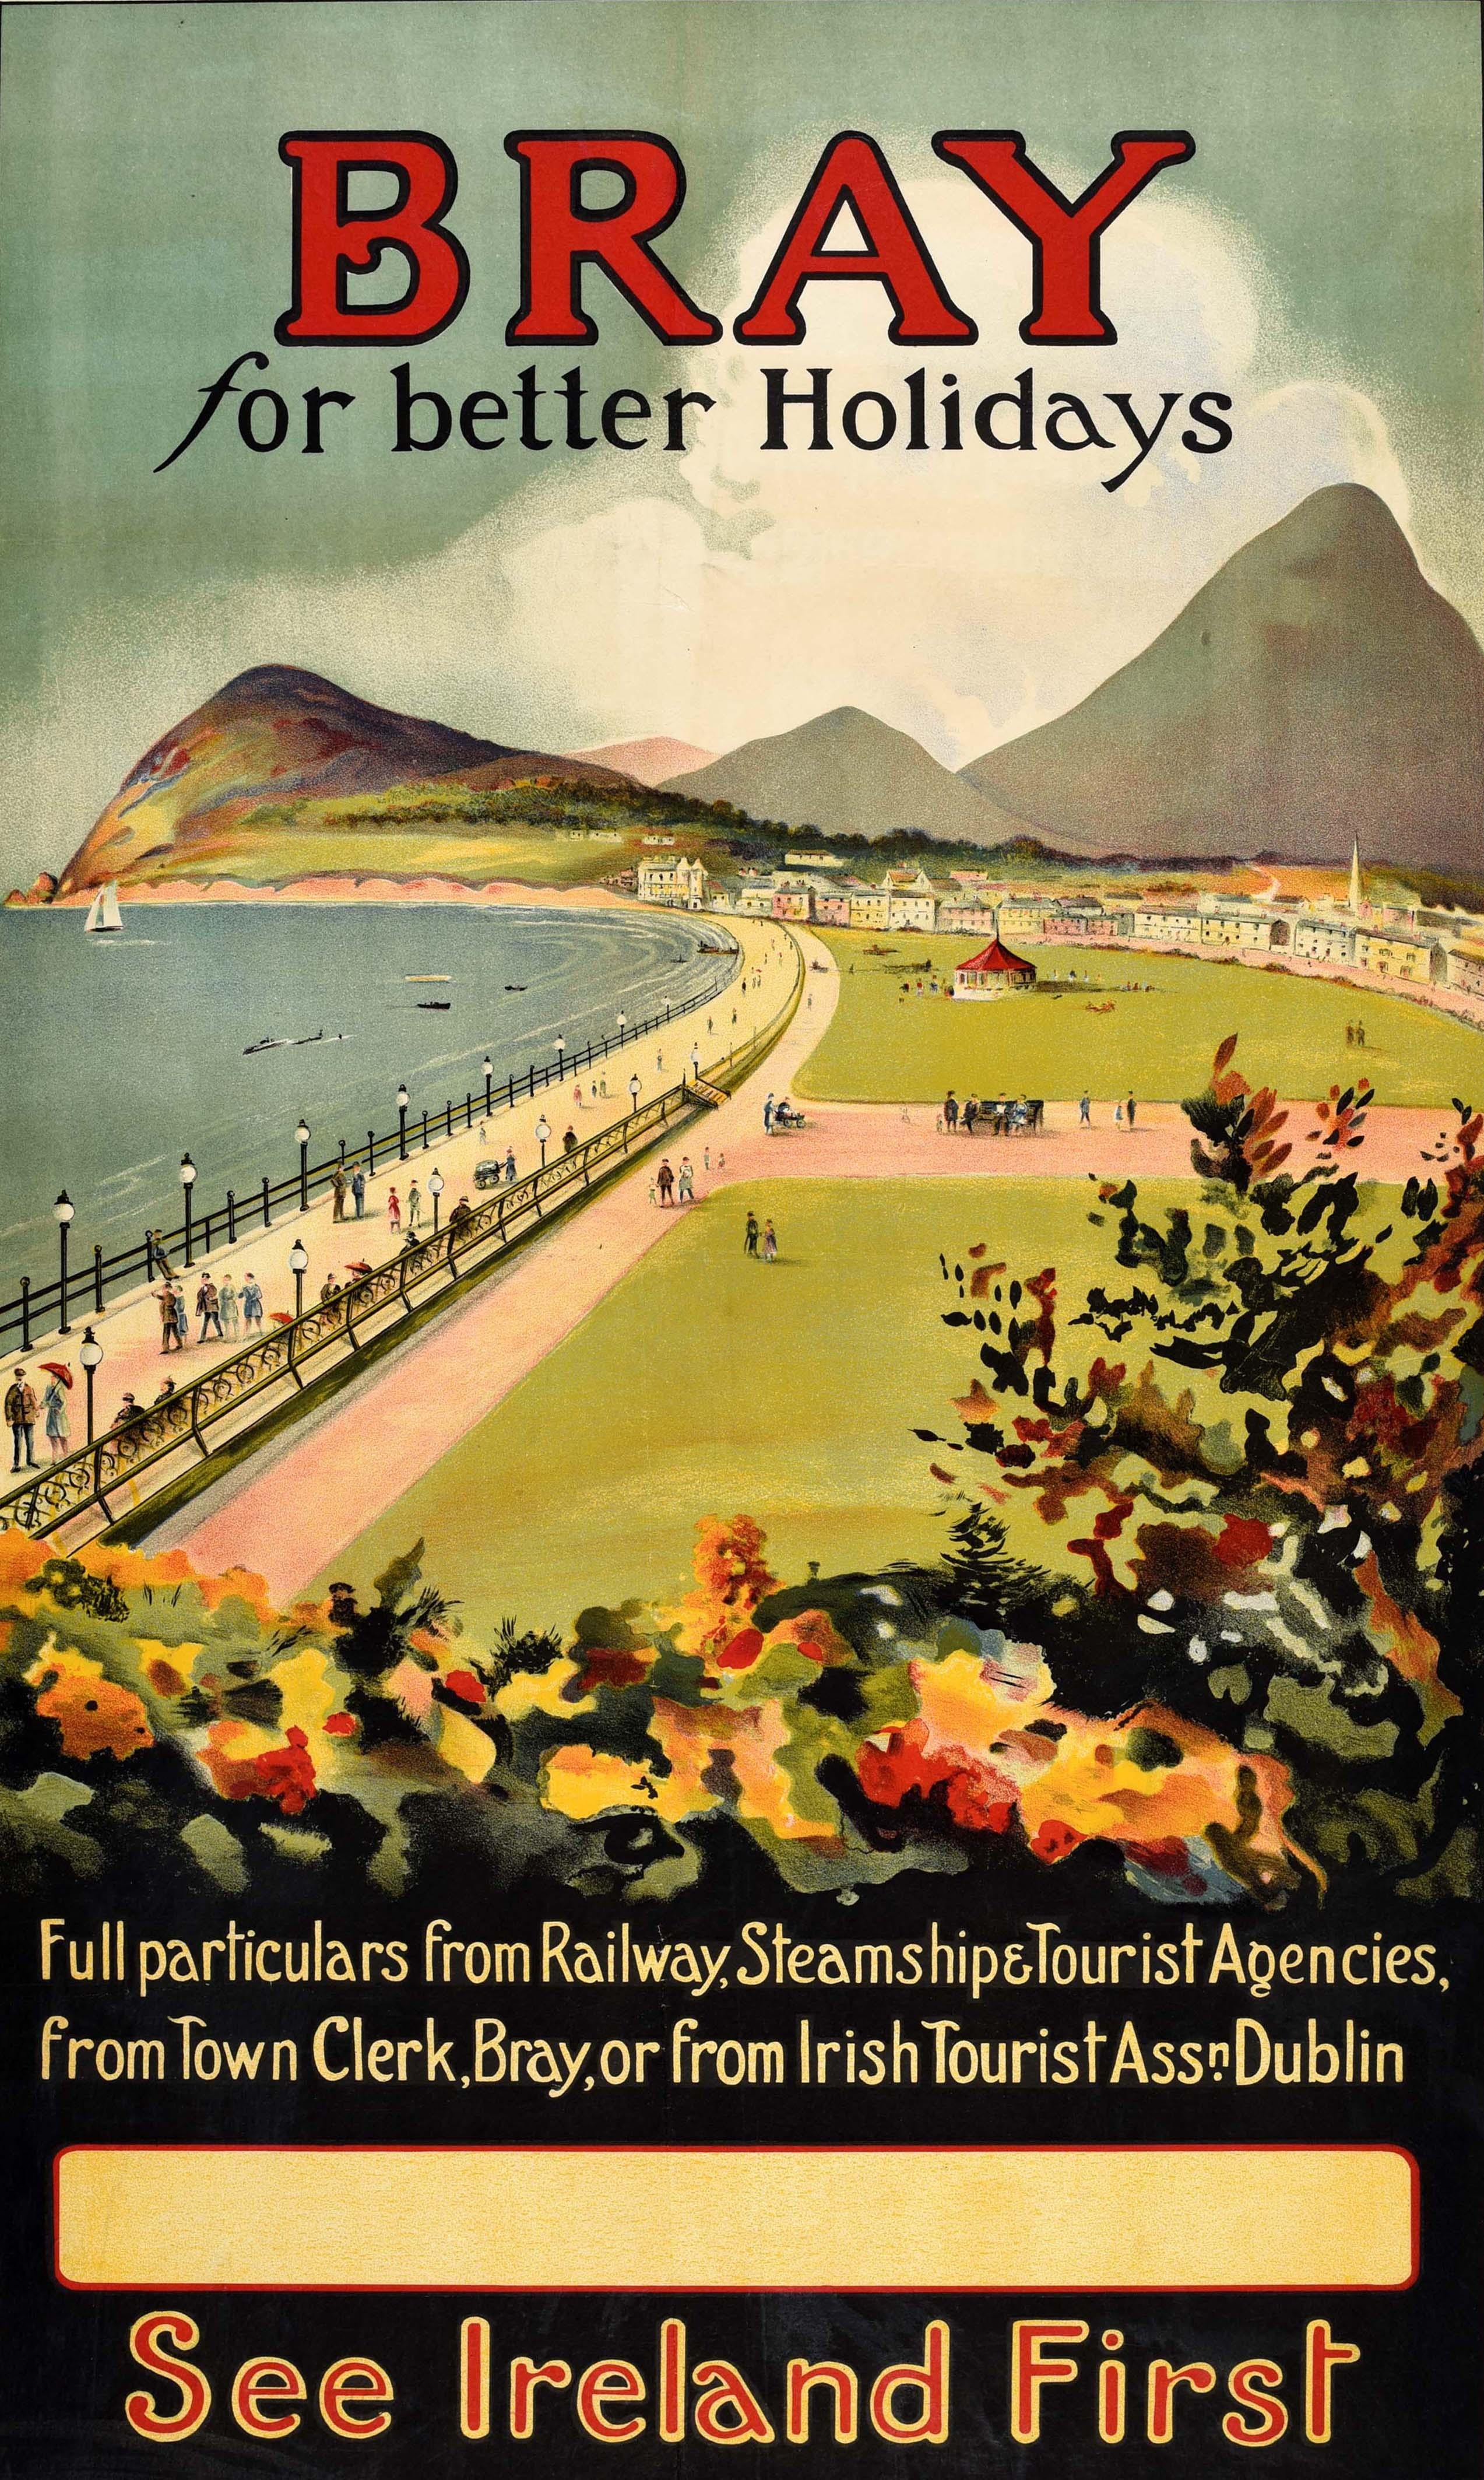 Original vintage train travel poster - Bray for Better Holidays See Ireland First - featuring people enjoying a walk along the seafront promenade and beach in the resort town of Bray in County Wicklow Ireland with the Victorian bandstand on the